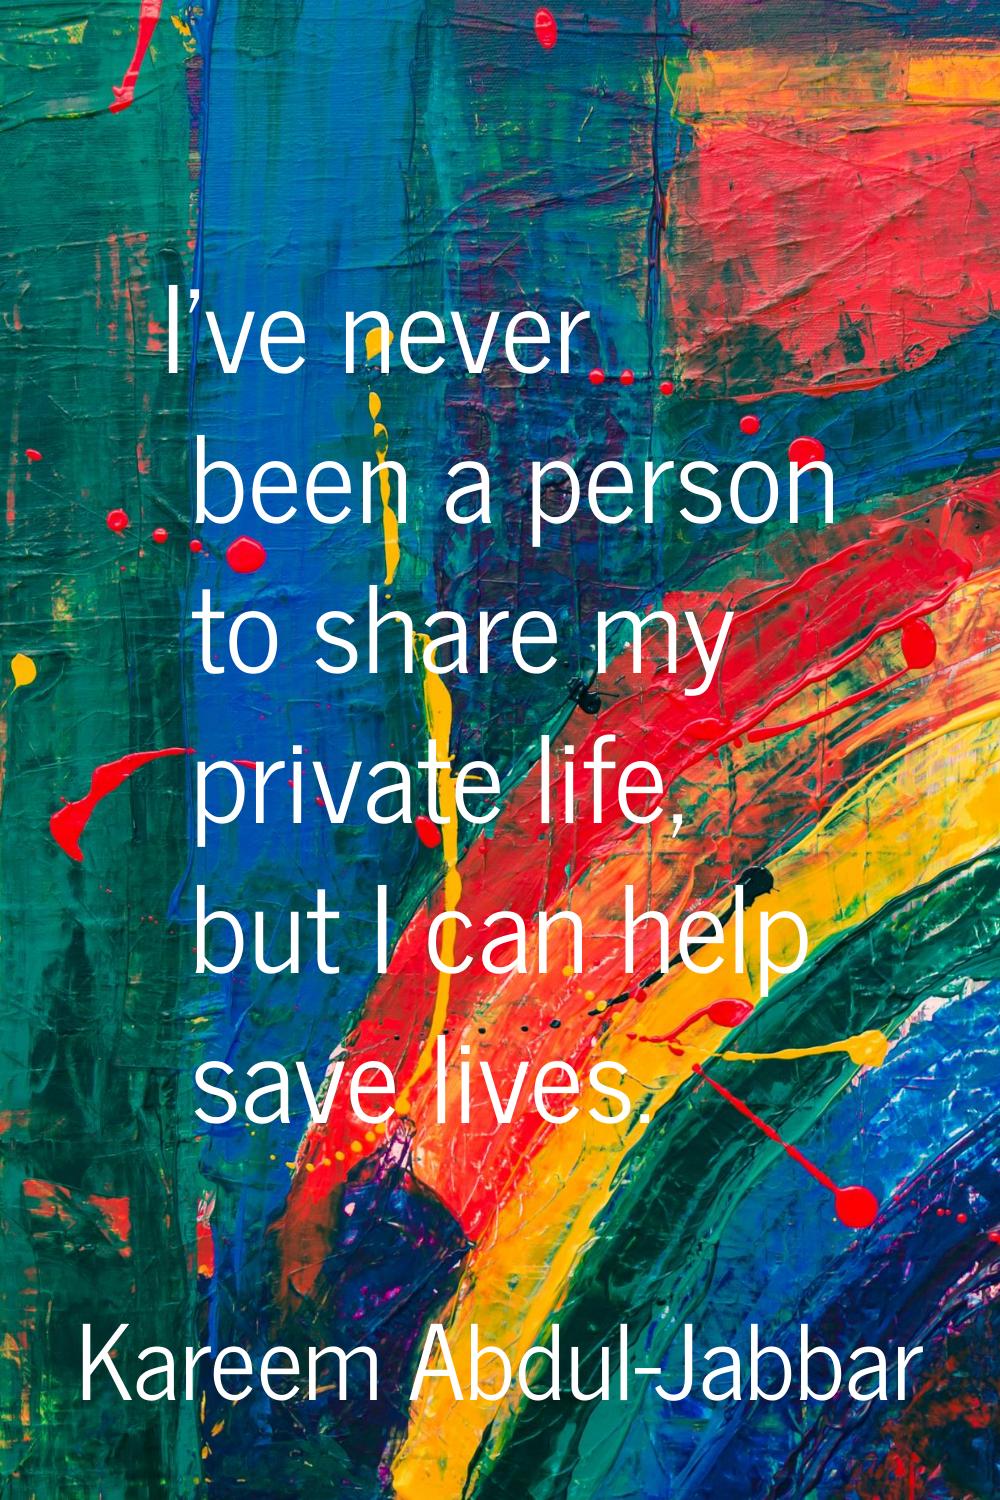 I've never been a person to share my private life, but I can help save lives.